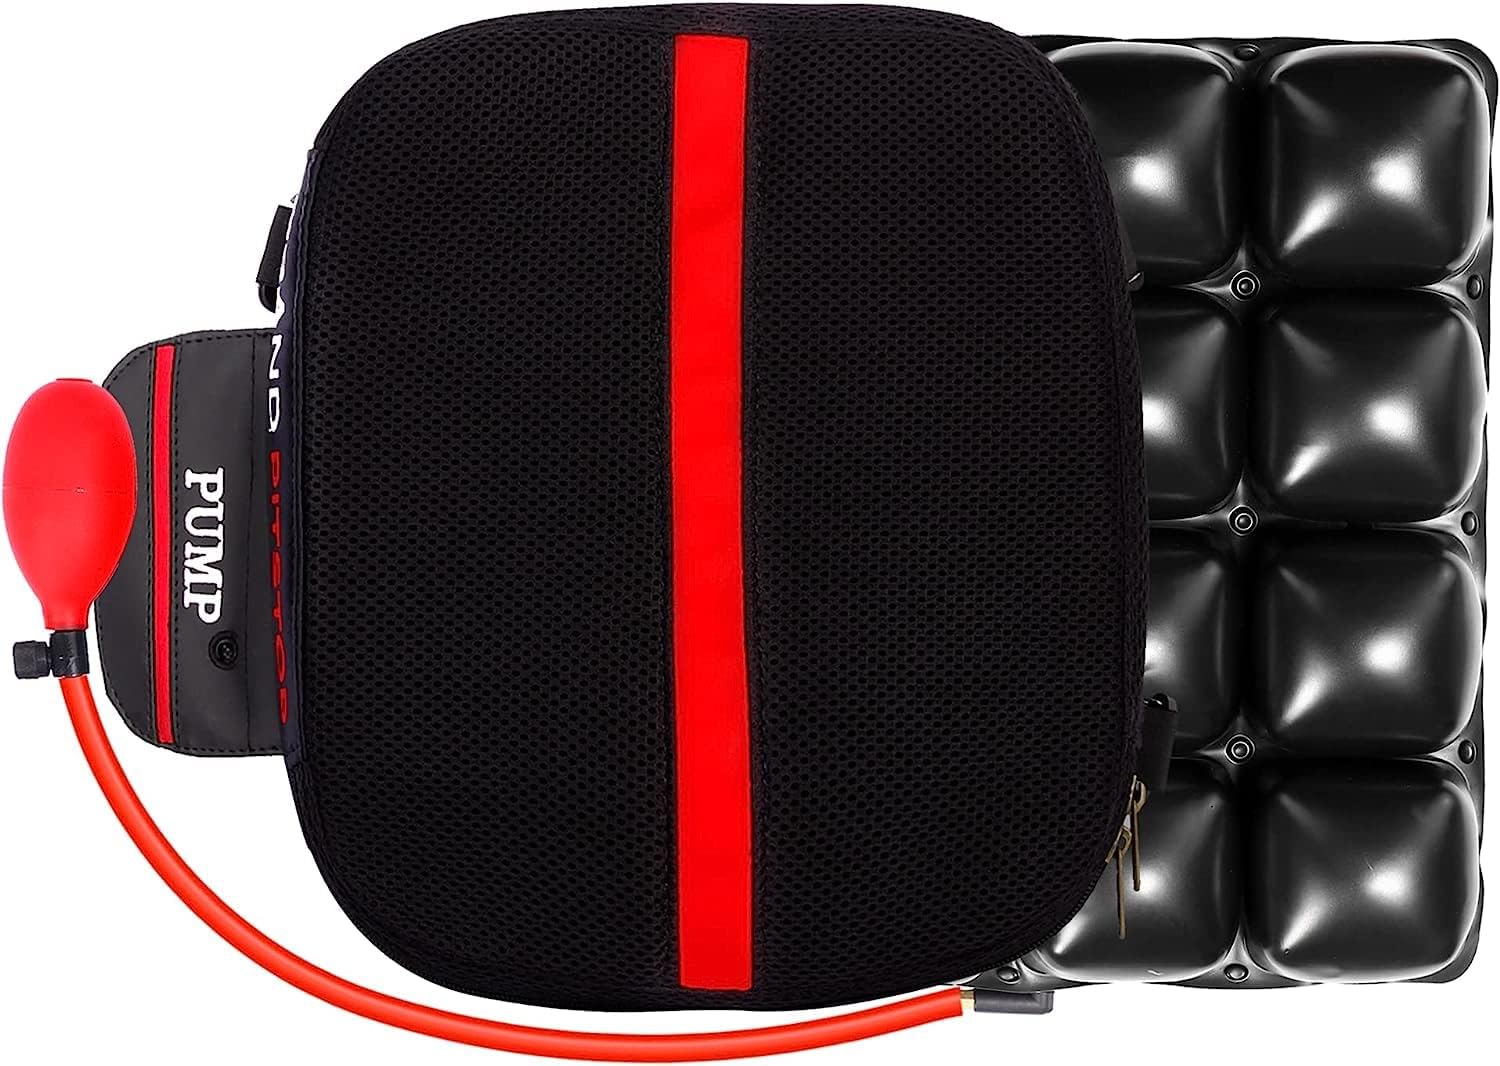 GRAND PITSTOP Motorcycle Air Seat Cushion, on The go inflate & Deflate, Pressure Relief Motorcycle Seat Pad, Shock Proof Comfortable for Motorbike Long Rides (Pillion Premium with Air Pump) von GRAND PITSTOP